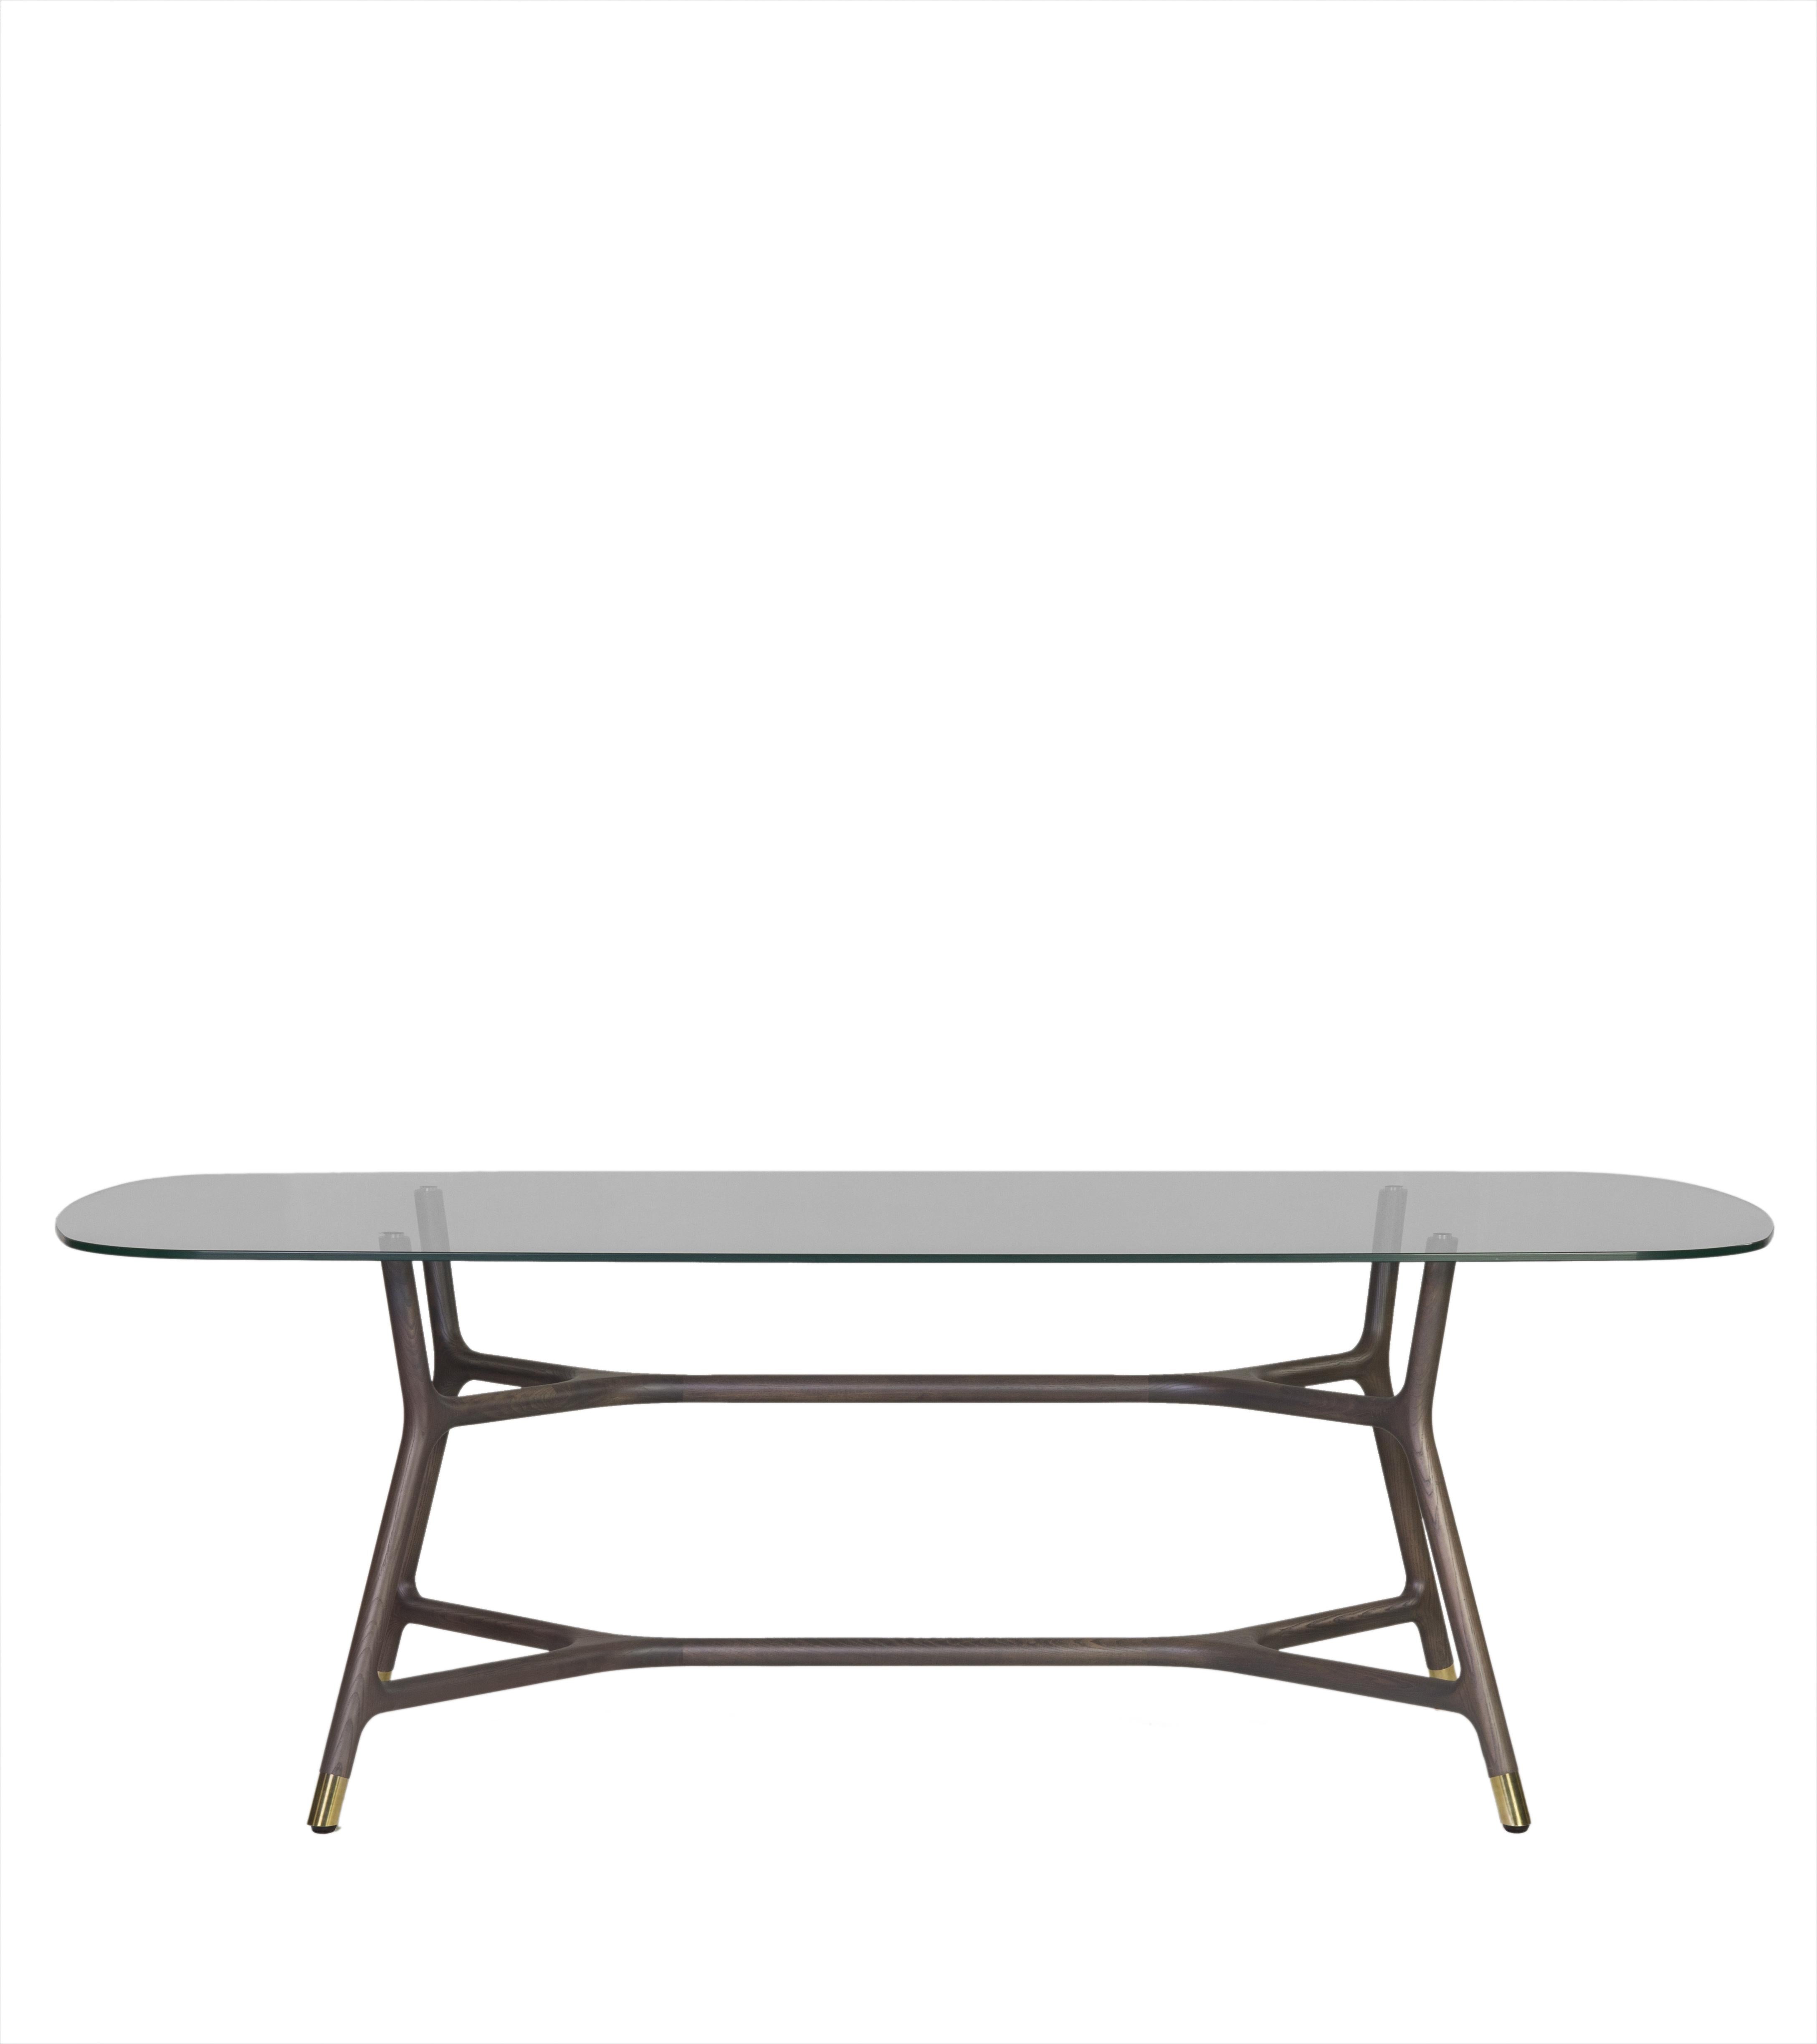 Contemporary style Joyce dining table made of turned ashwood with glass top and brass tips.
available in different sizes and top materials
   